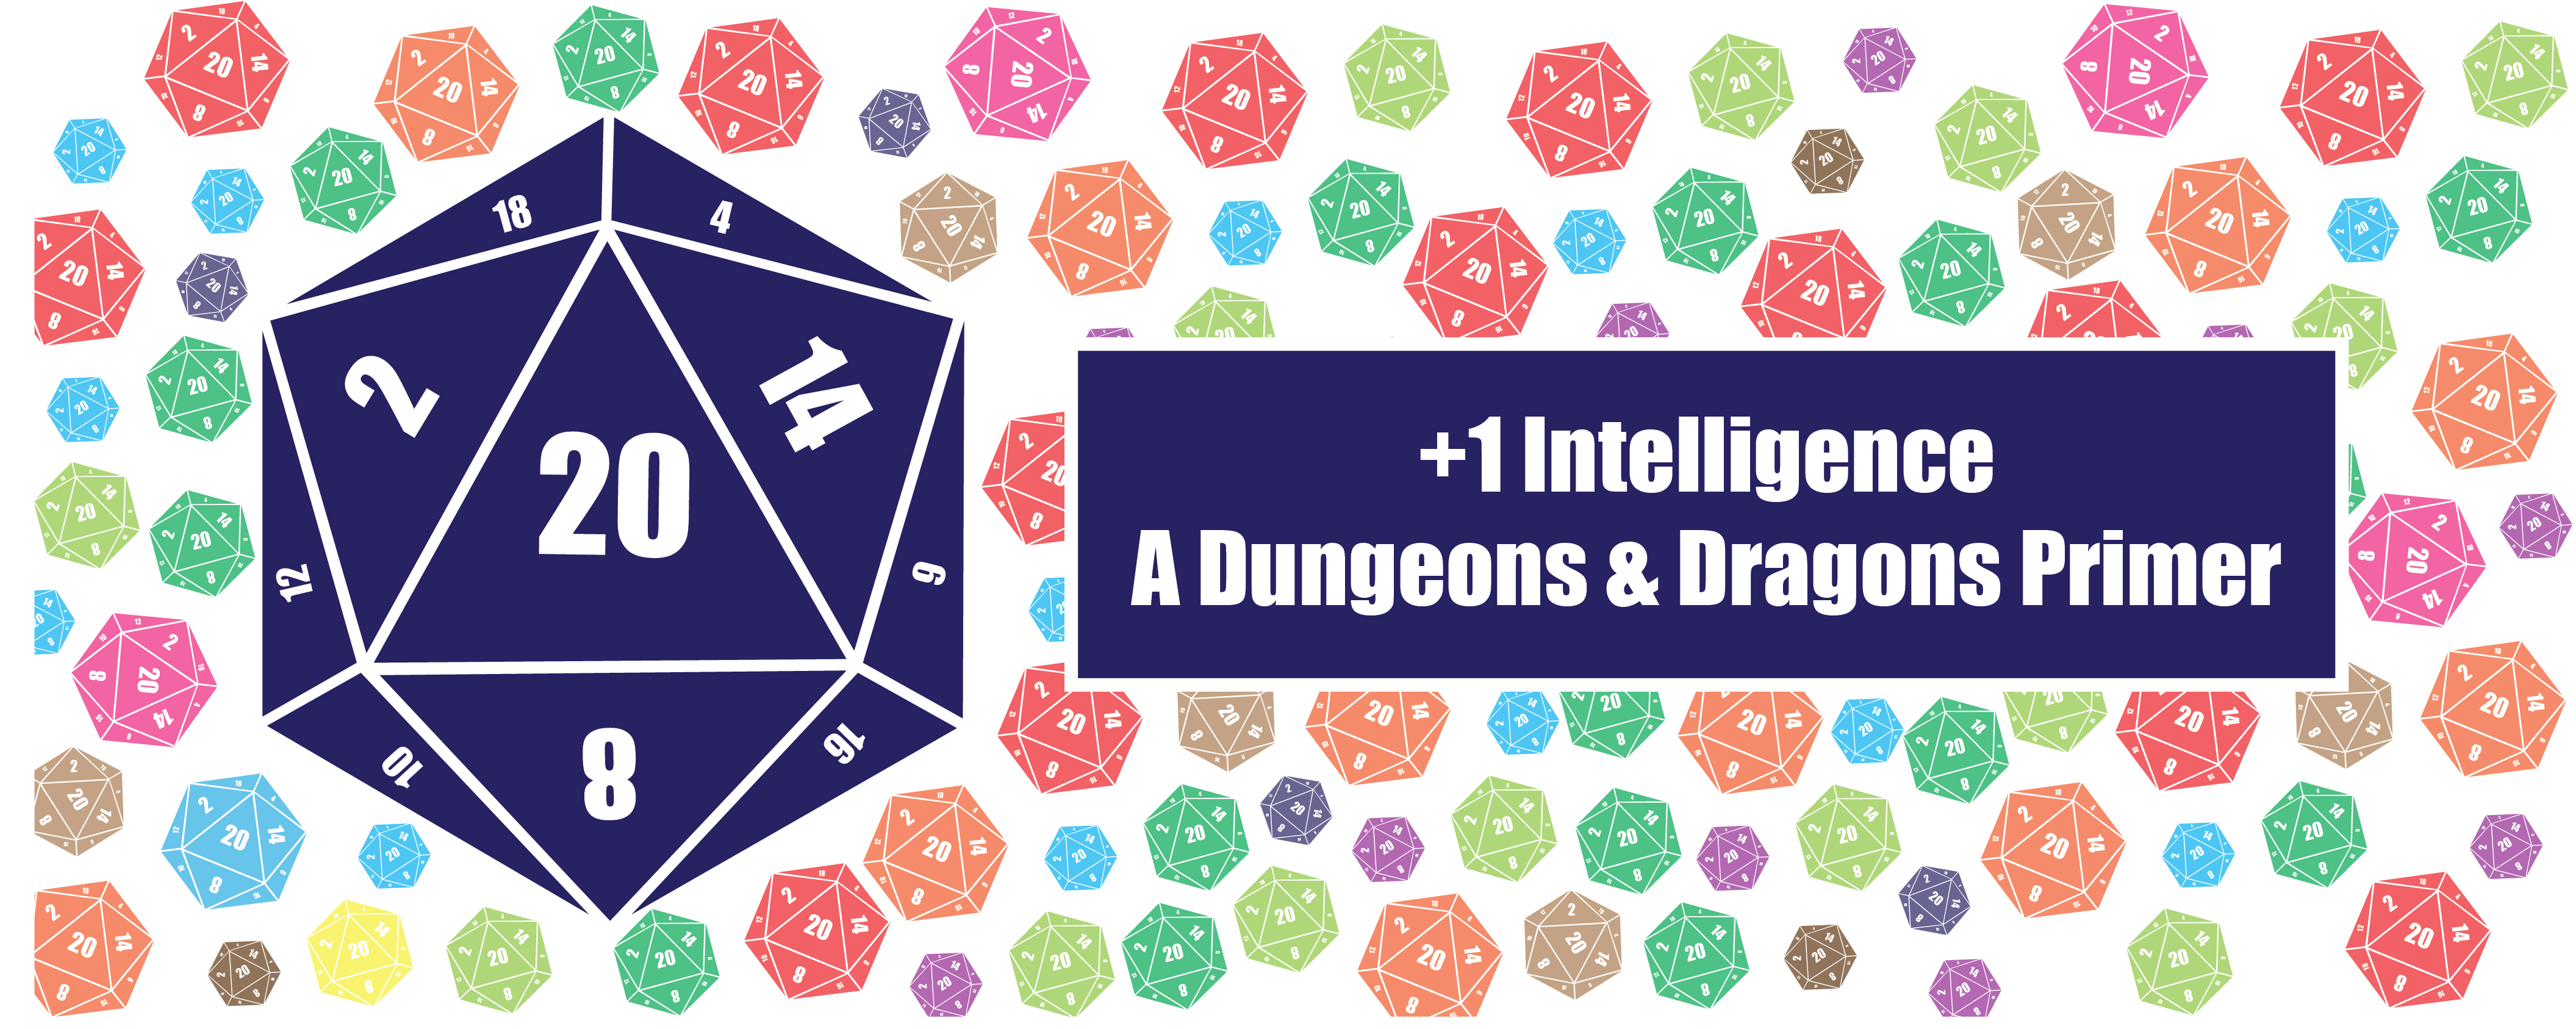 +1 Intelligence, A Dungeons & Dragons Primer: Introduction